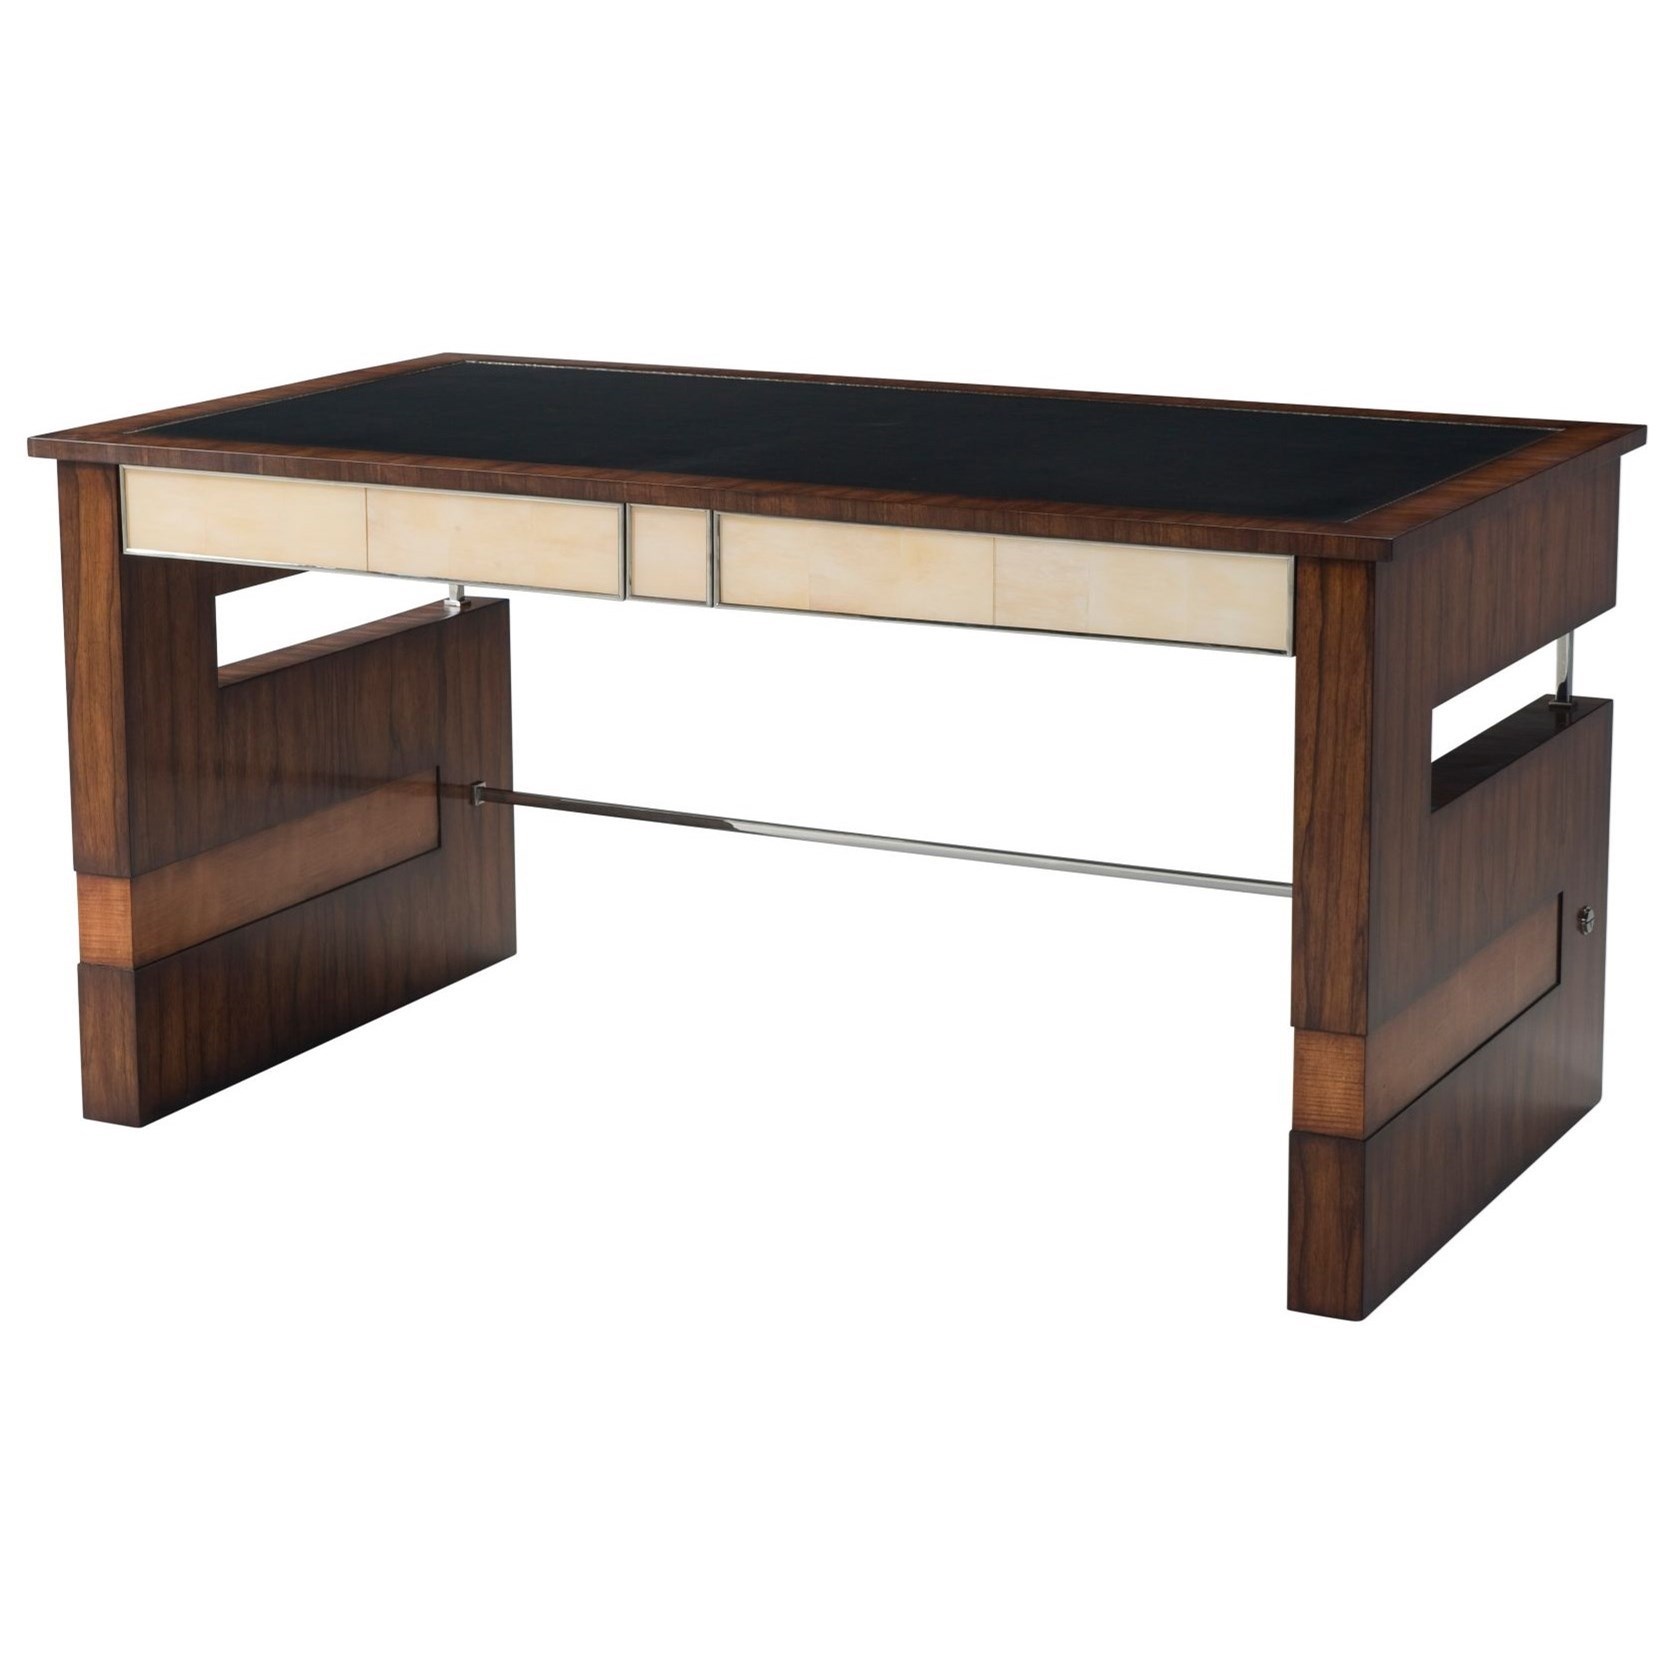 Striking Elements Writing Table with Inset Leather Top